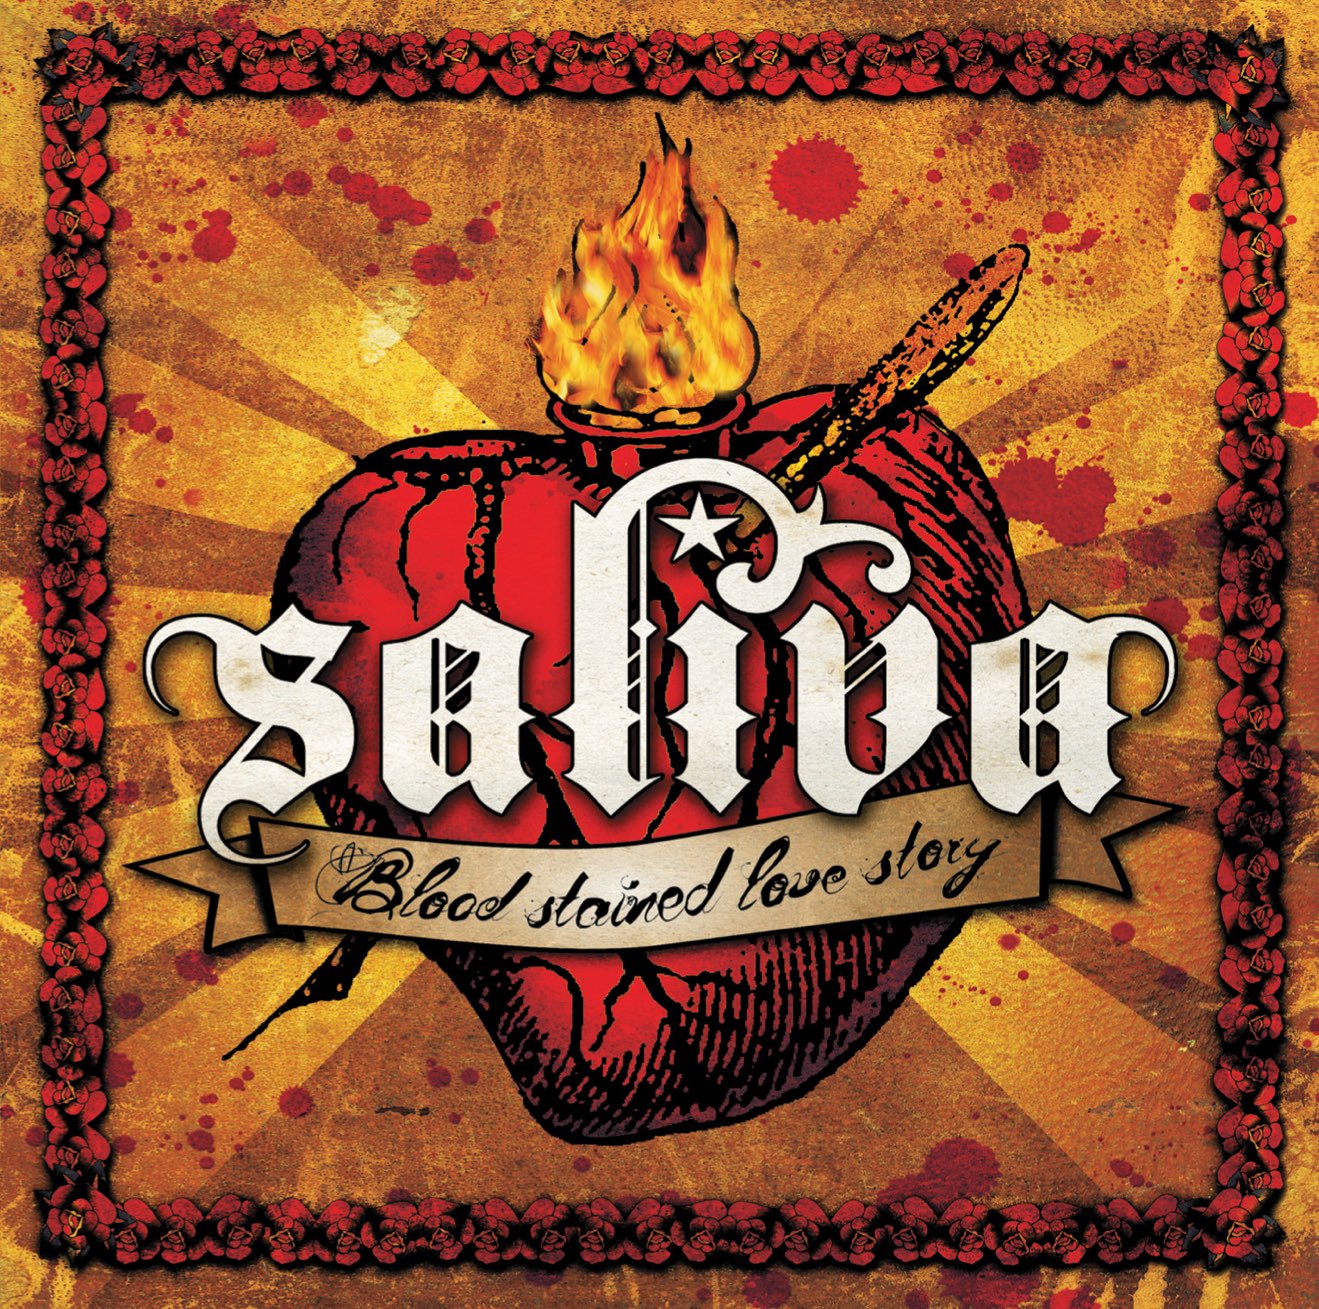 Saliva – Blood Stained Love Story (2007) [iTunes Match M4A]